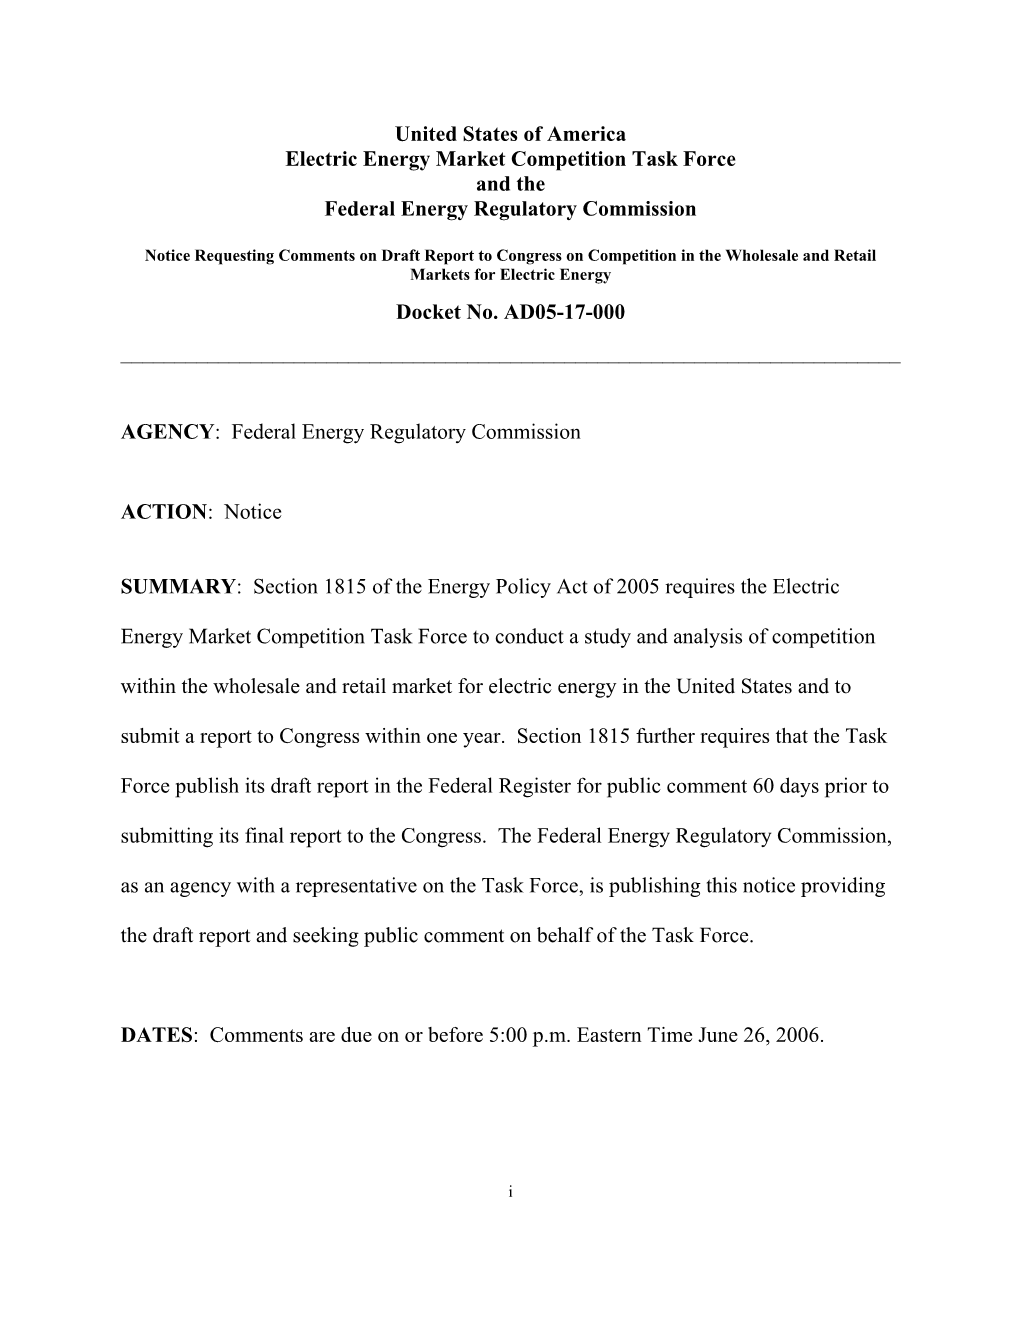 United States of America Electric Energy Market Competition Task Force and the Federal Energy Regulatory Commission